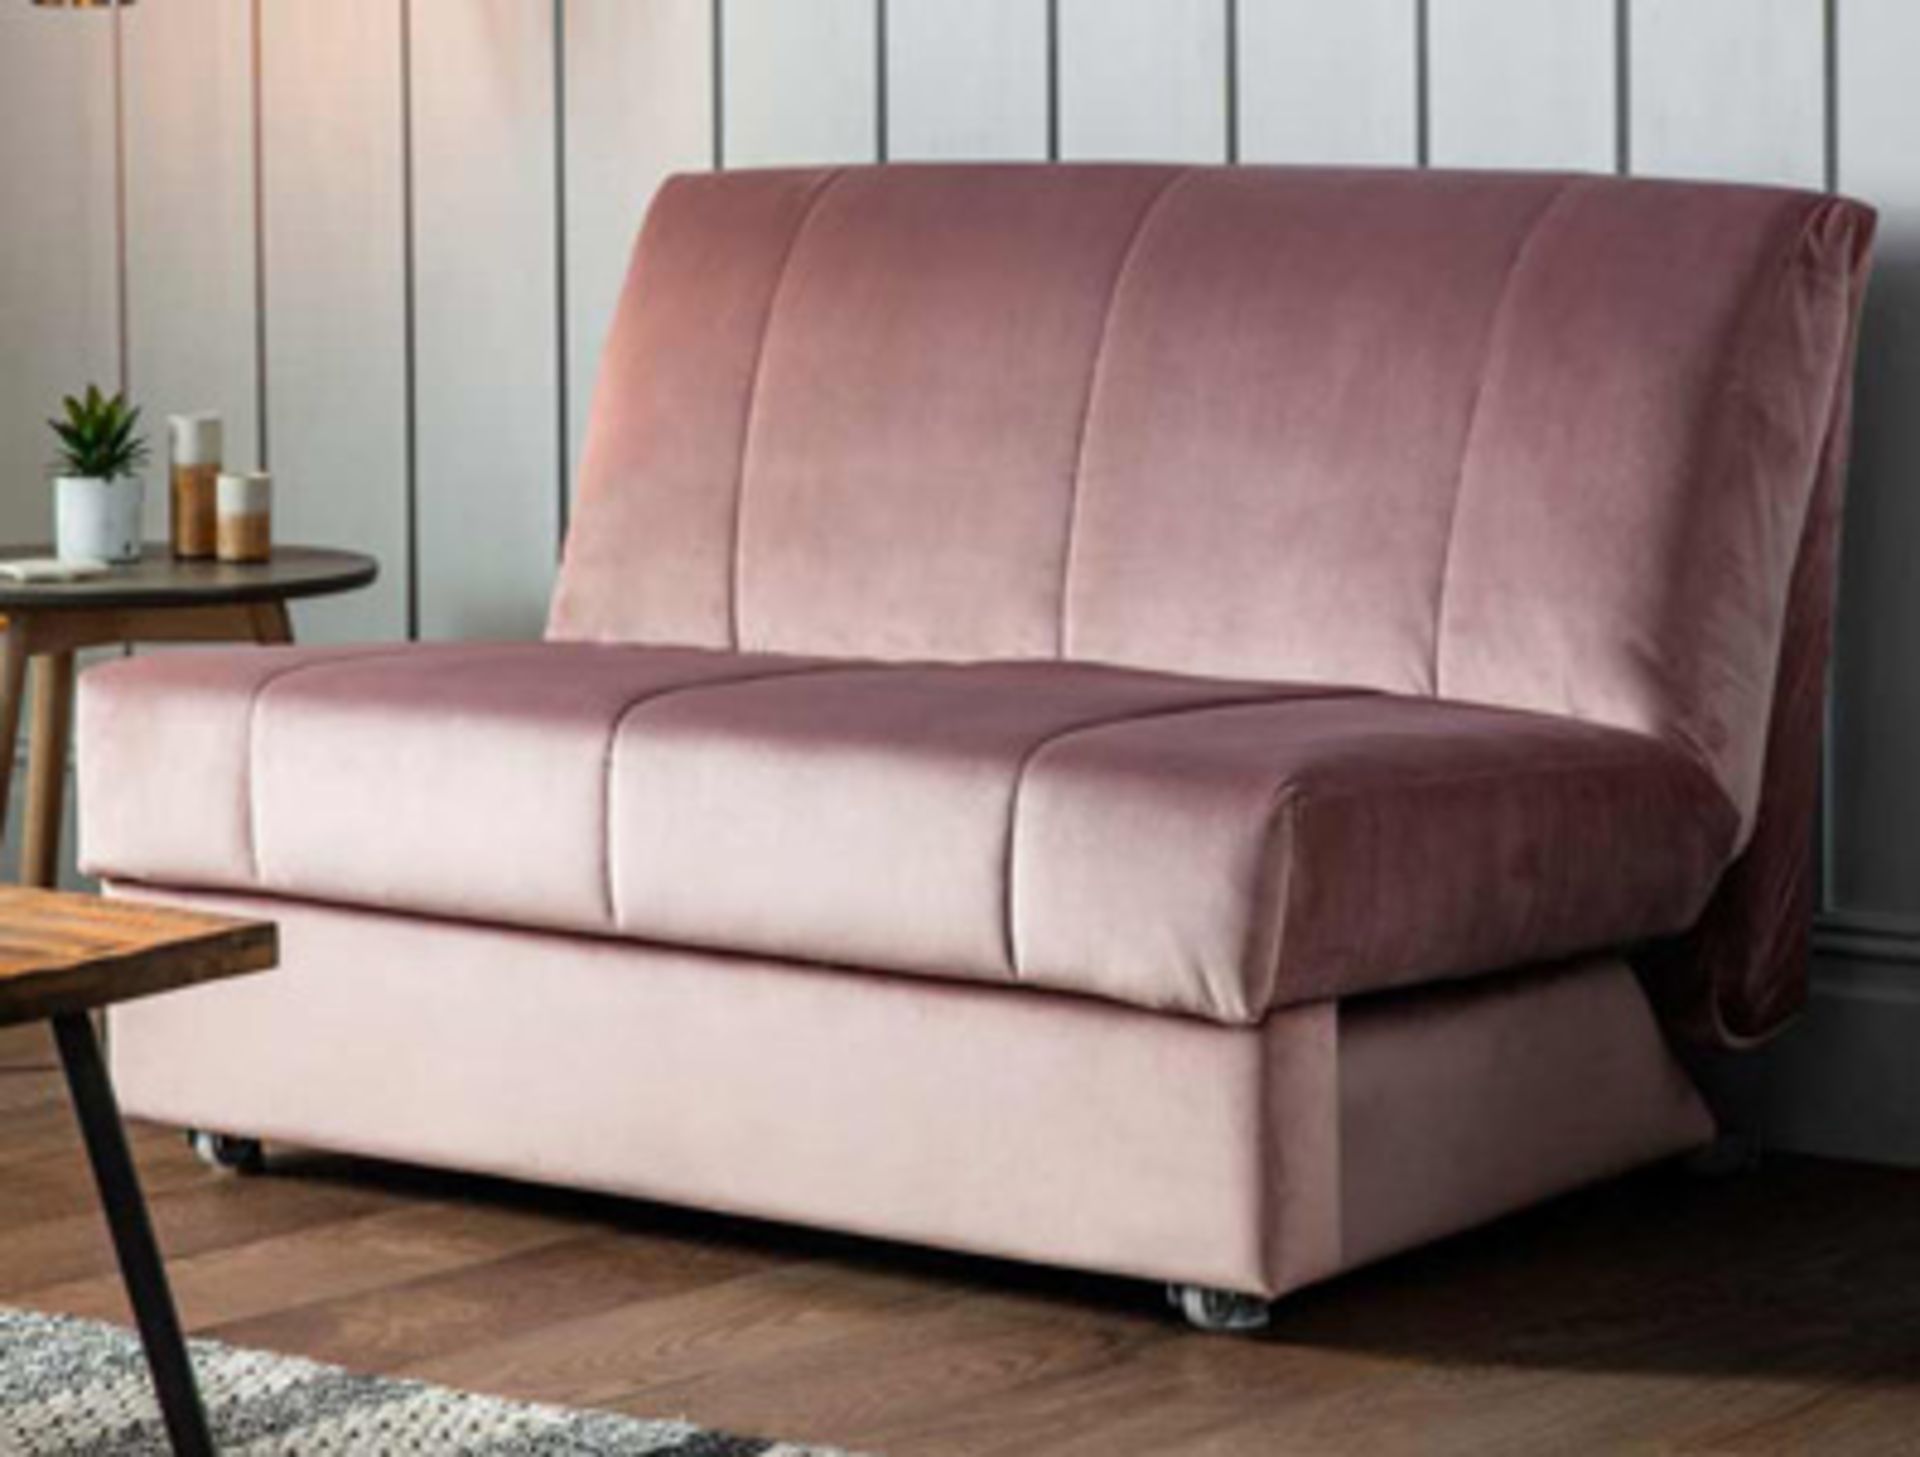 Metz Sofa 120cm Modena Mulberry Upholstered The Metz collection is ideal even for smaller spaces,